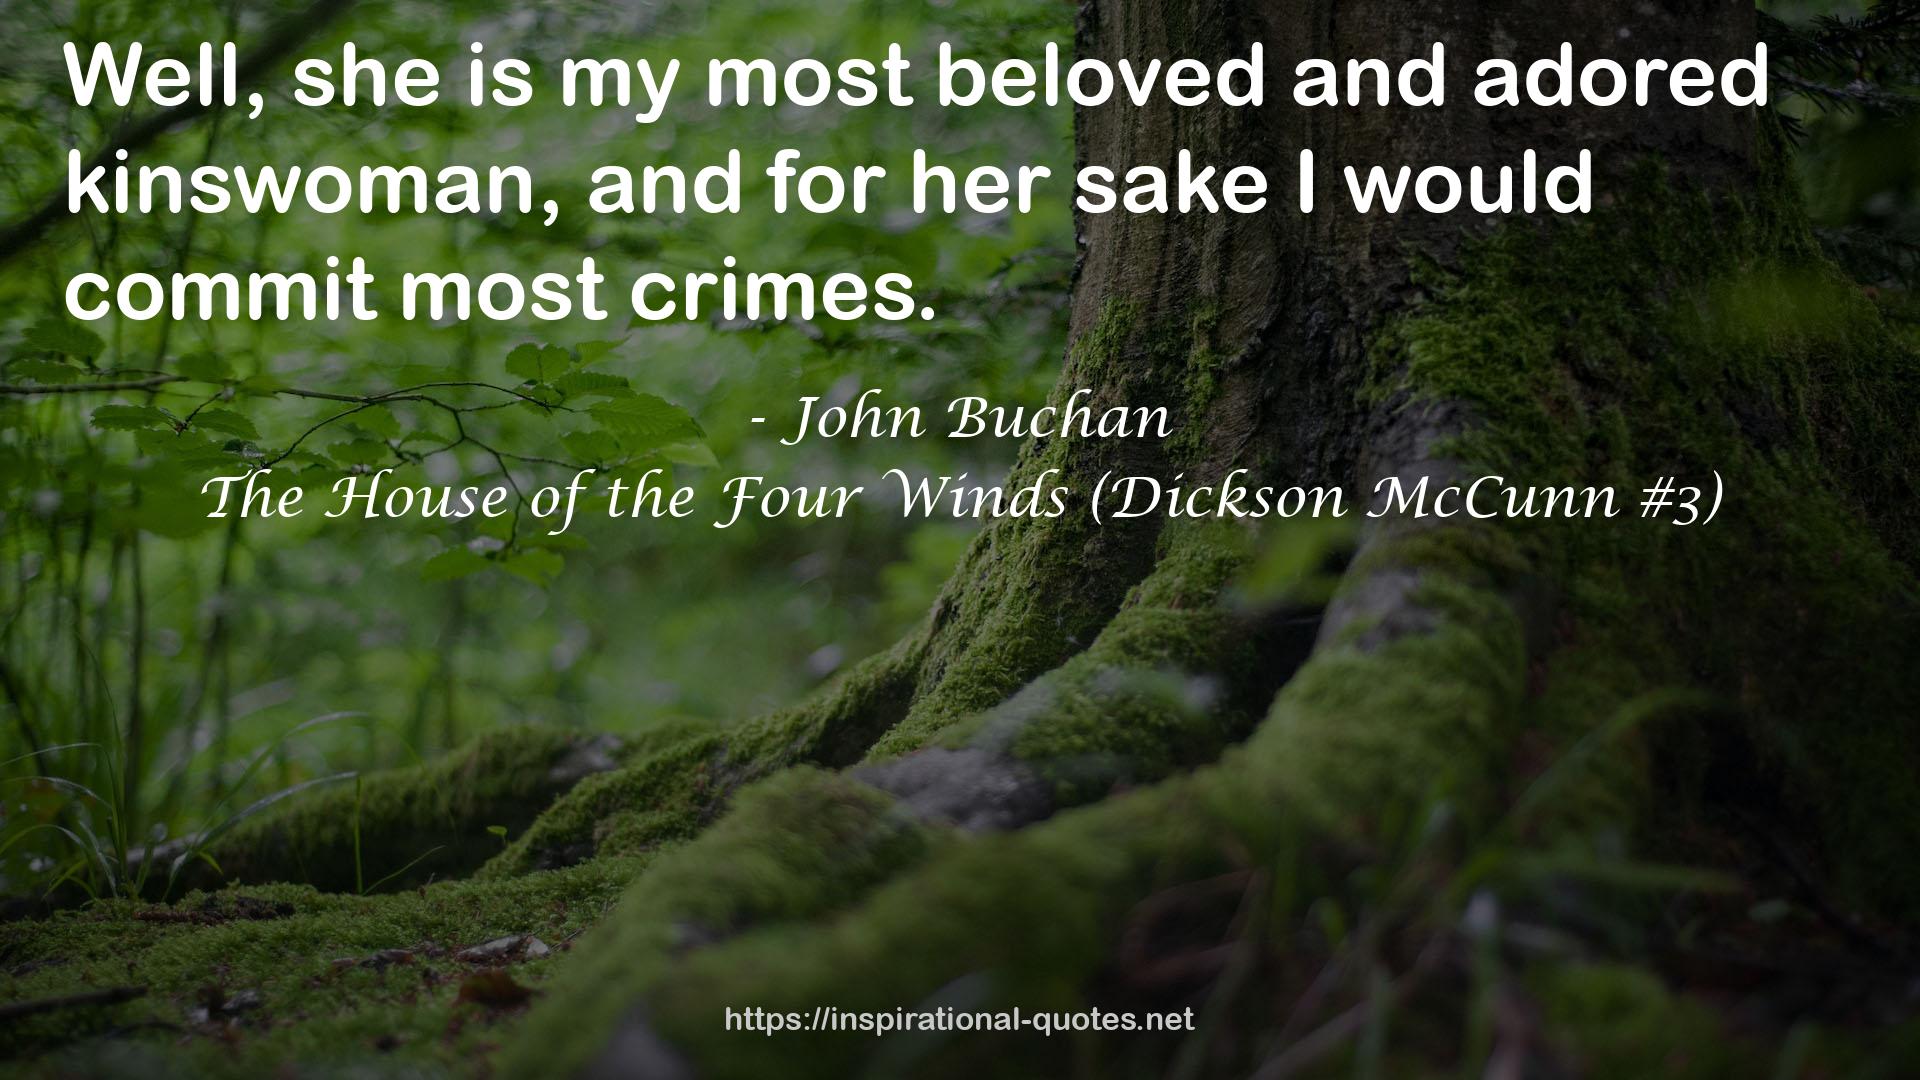 The House of the Four Winds (Dickson McCunn #3) QUOTES